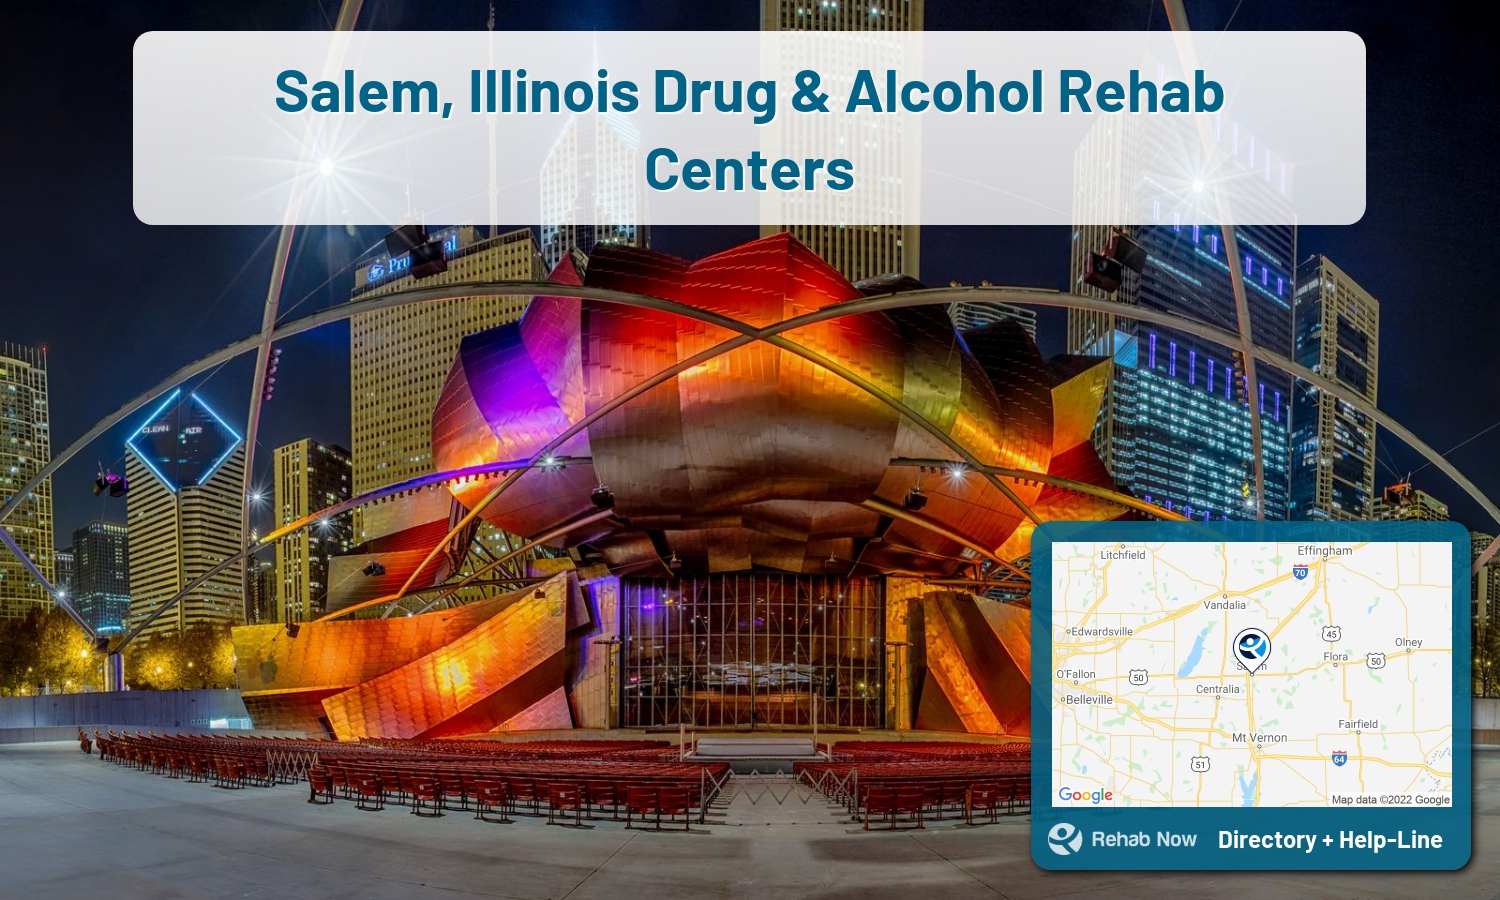 Salem, IL Treatment Centers. Find drug rehab in Salem, Illinois, or detox and treatment programs. Get the right help now!